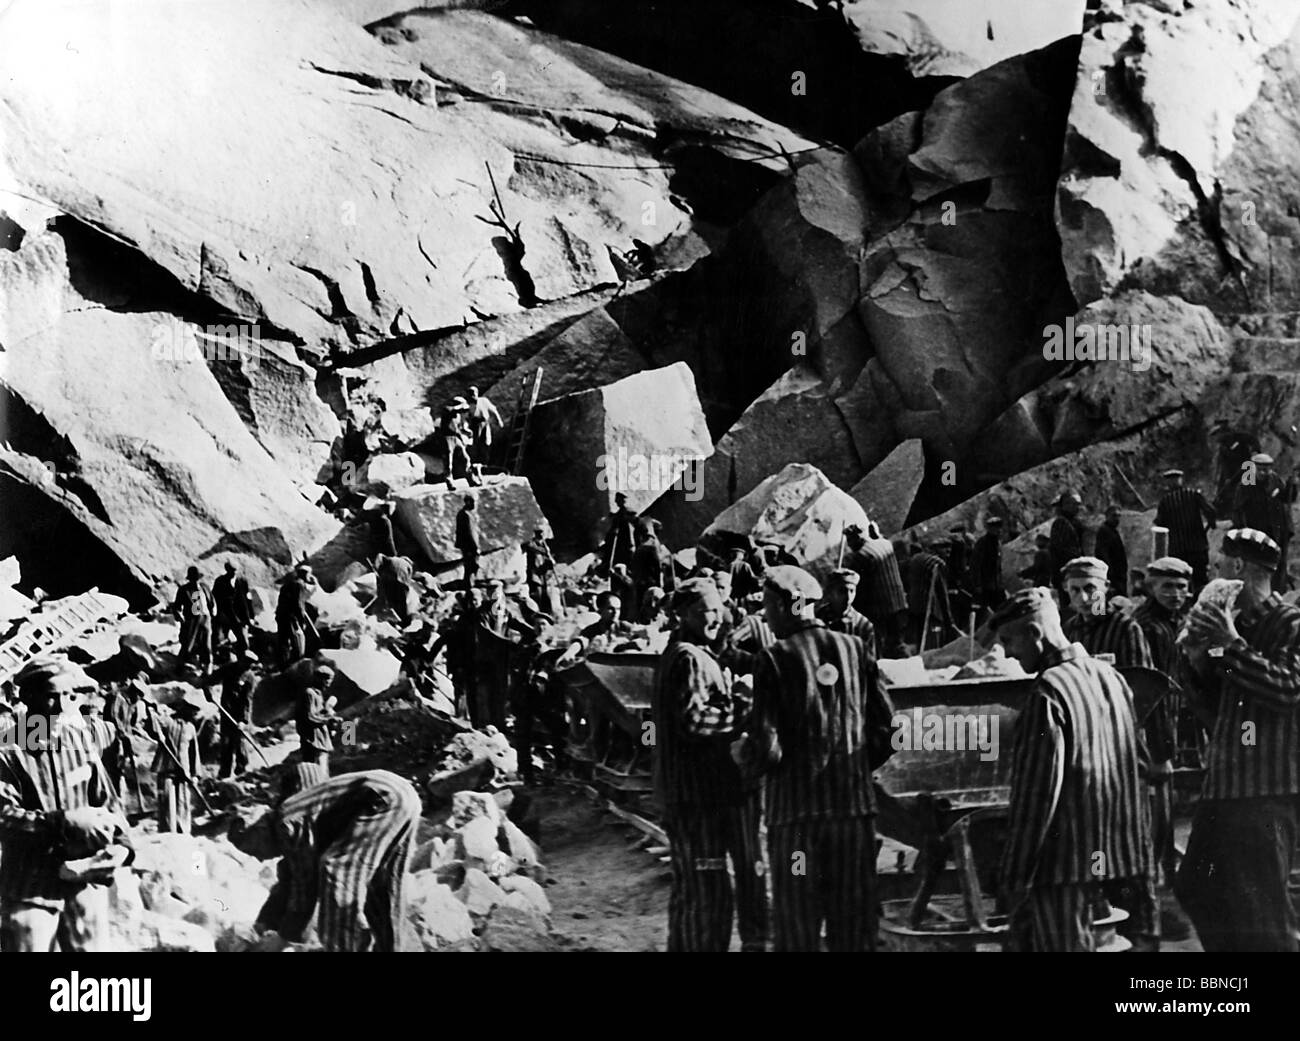 Nazism / National Socialism, crimes, concentration camps, Mauthausen, Austria, prisoners working in a stone pit, circa 1940, Stock Photo